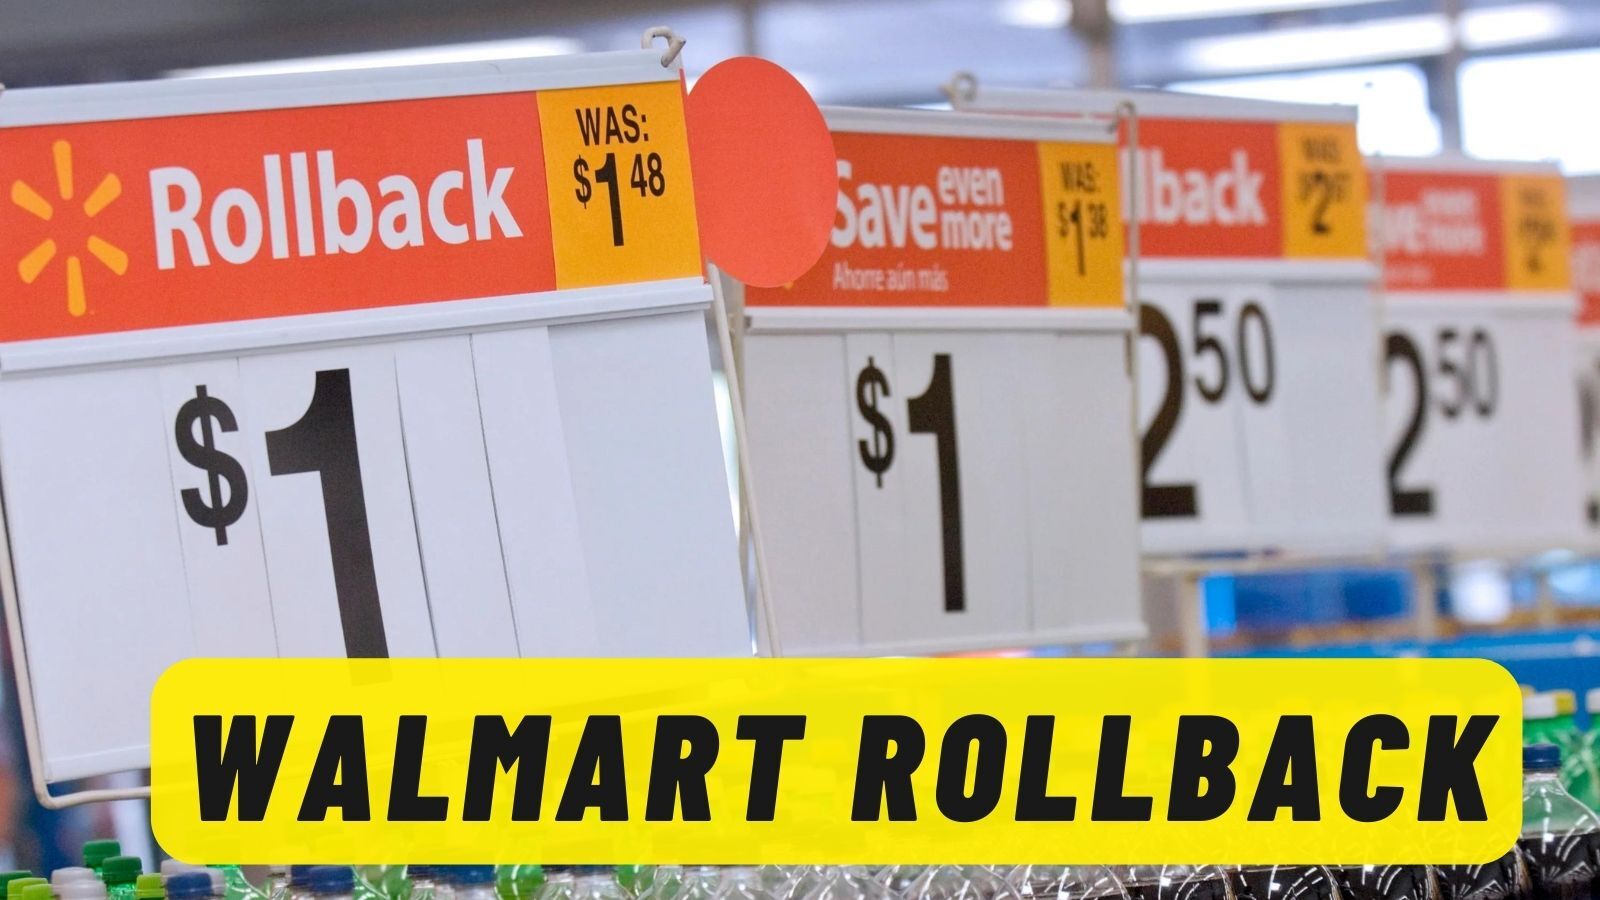 Rollback Walmart Meaning: Some Important Things You Need to Know!